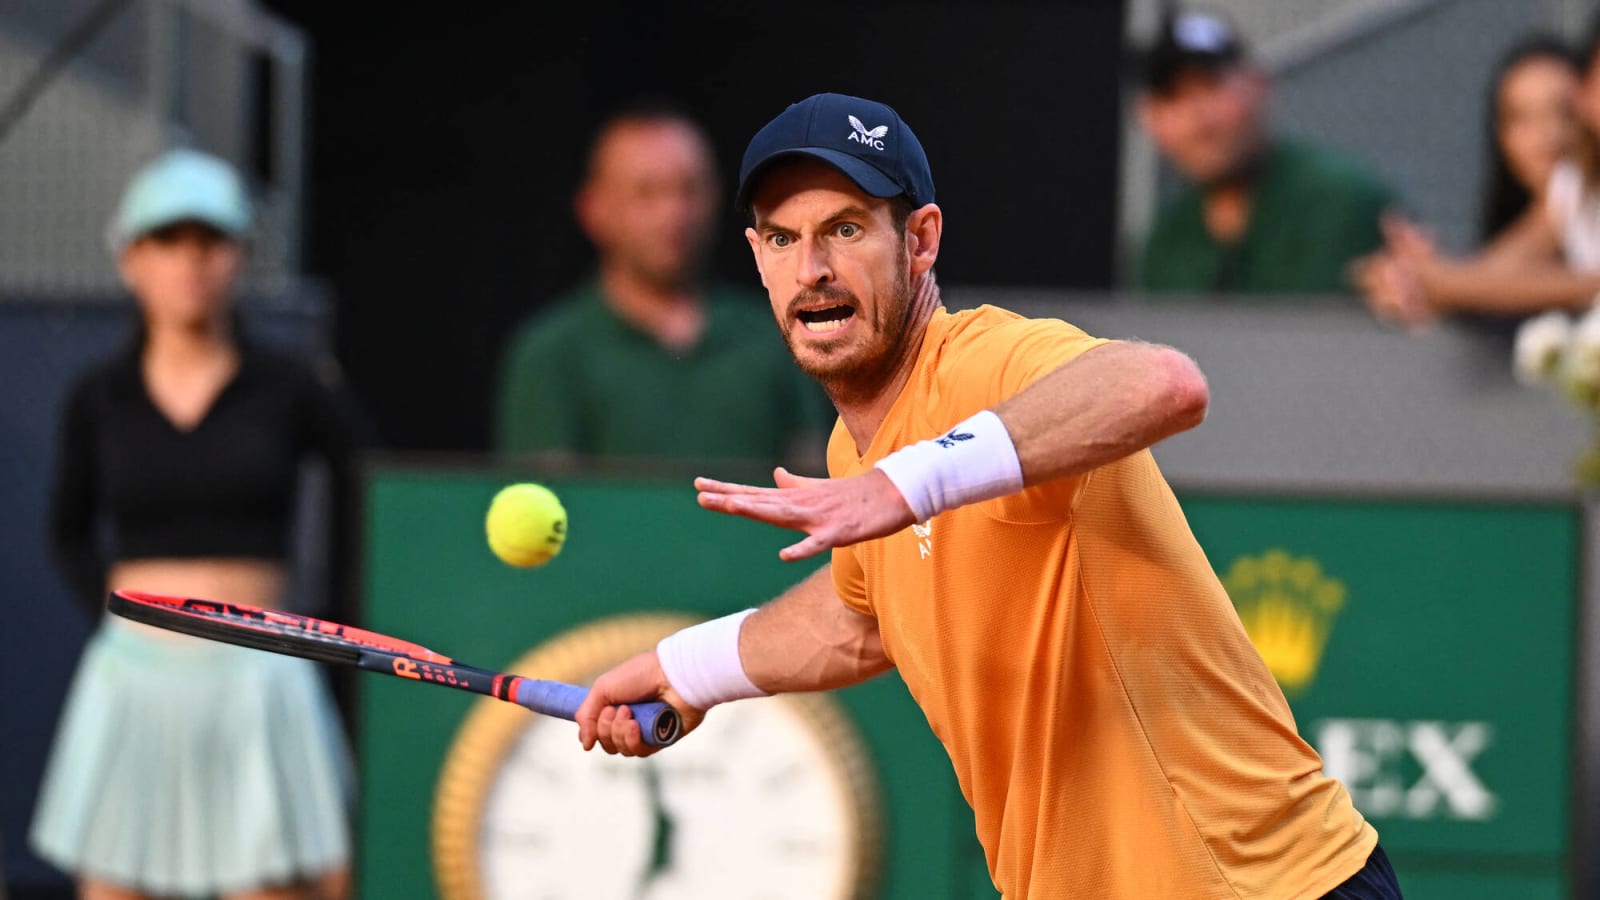 "Two Hotheads" Murray and Fognini to Reignite Rivalry at Italian Open